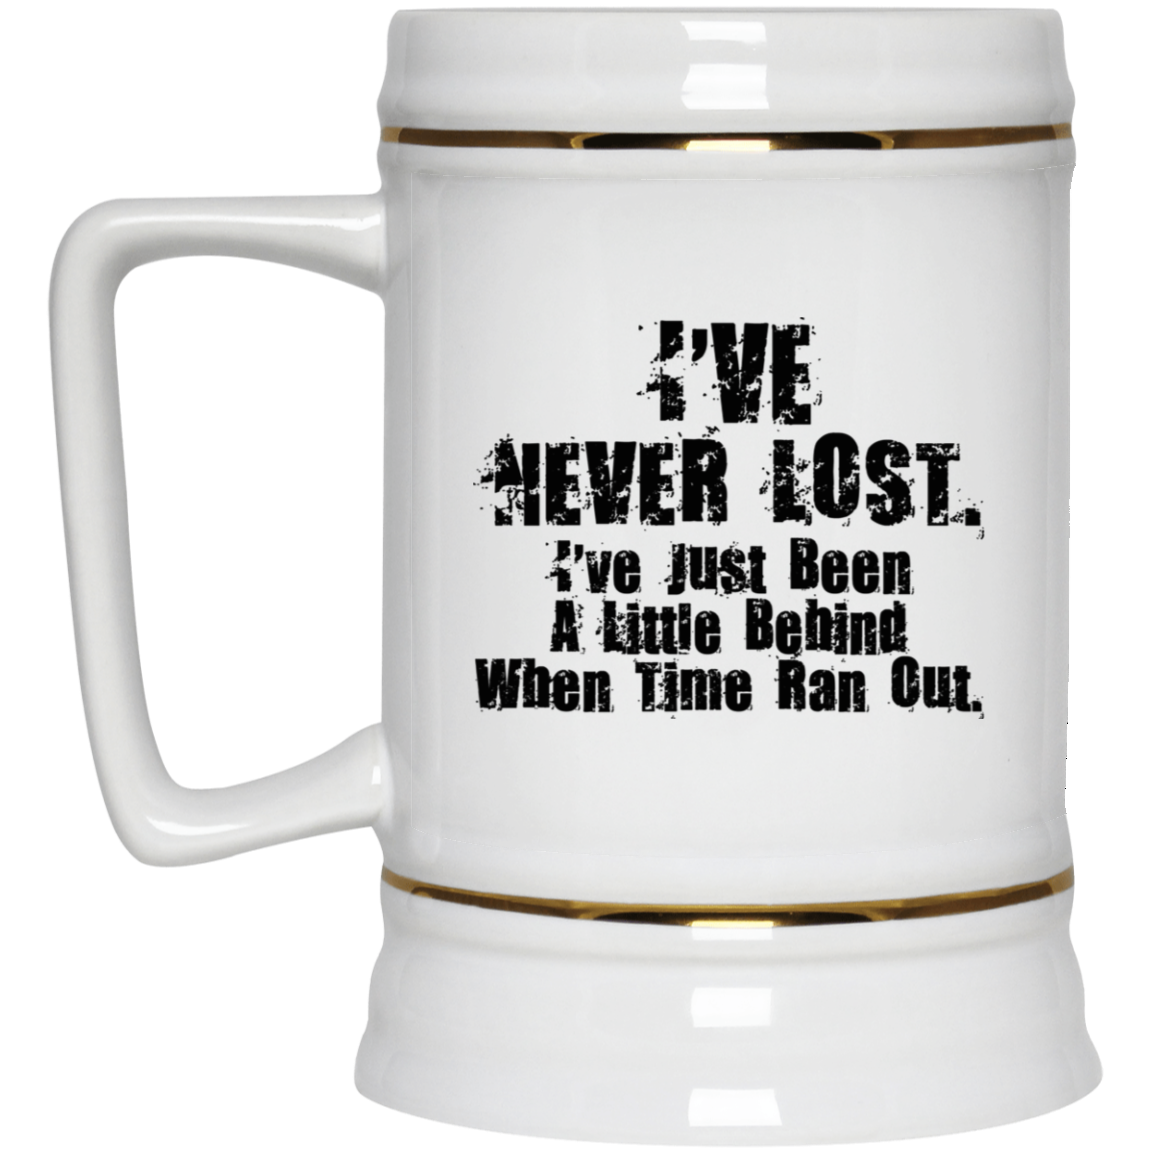 Details about  / Coffee Cup Mug Travel 11 15 I Am Taylor Let/'s Just Assume Never Wrong